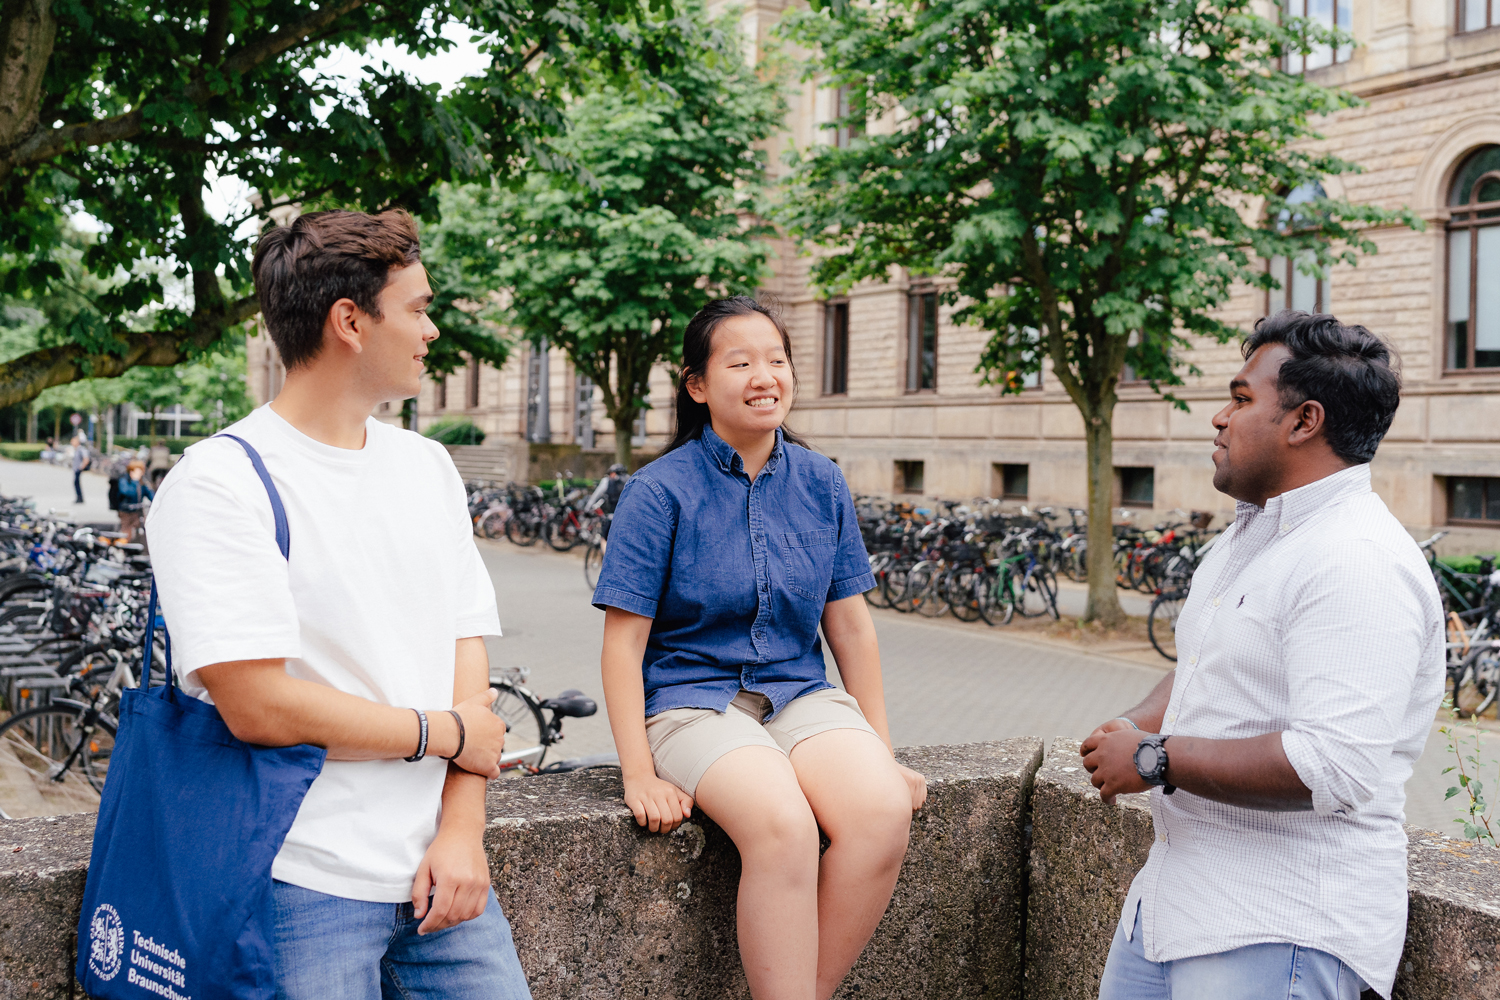 Three students stand in front of the old building of TU Braunschweig and chat animatedly with each other.